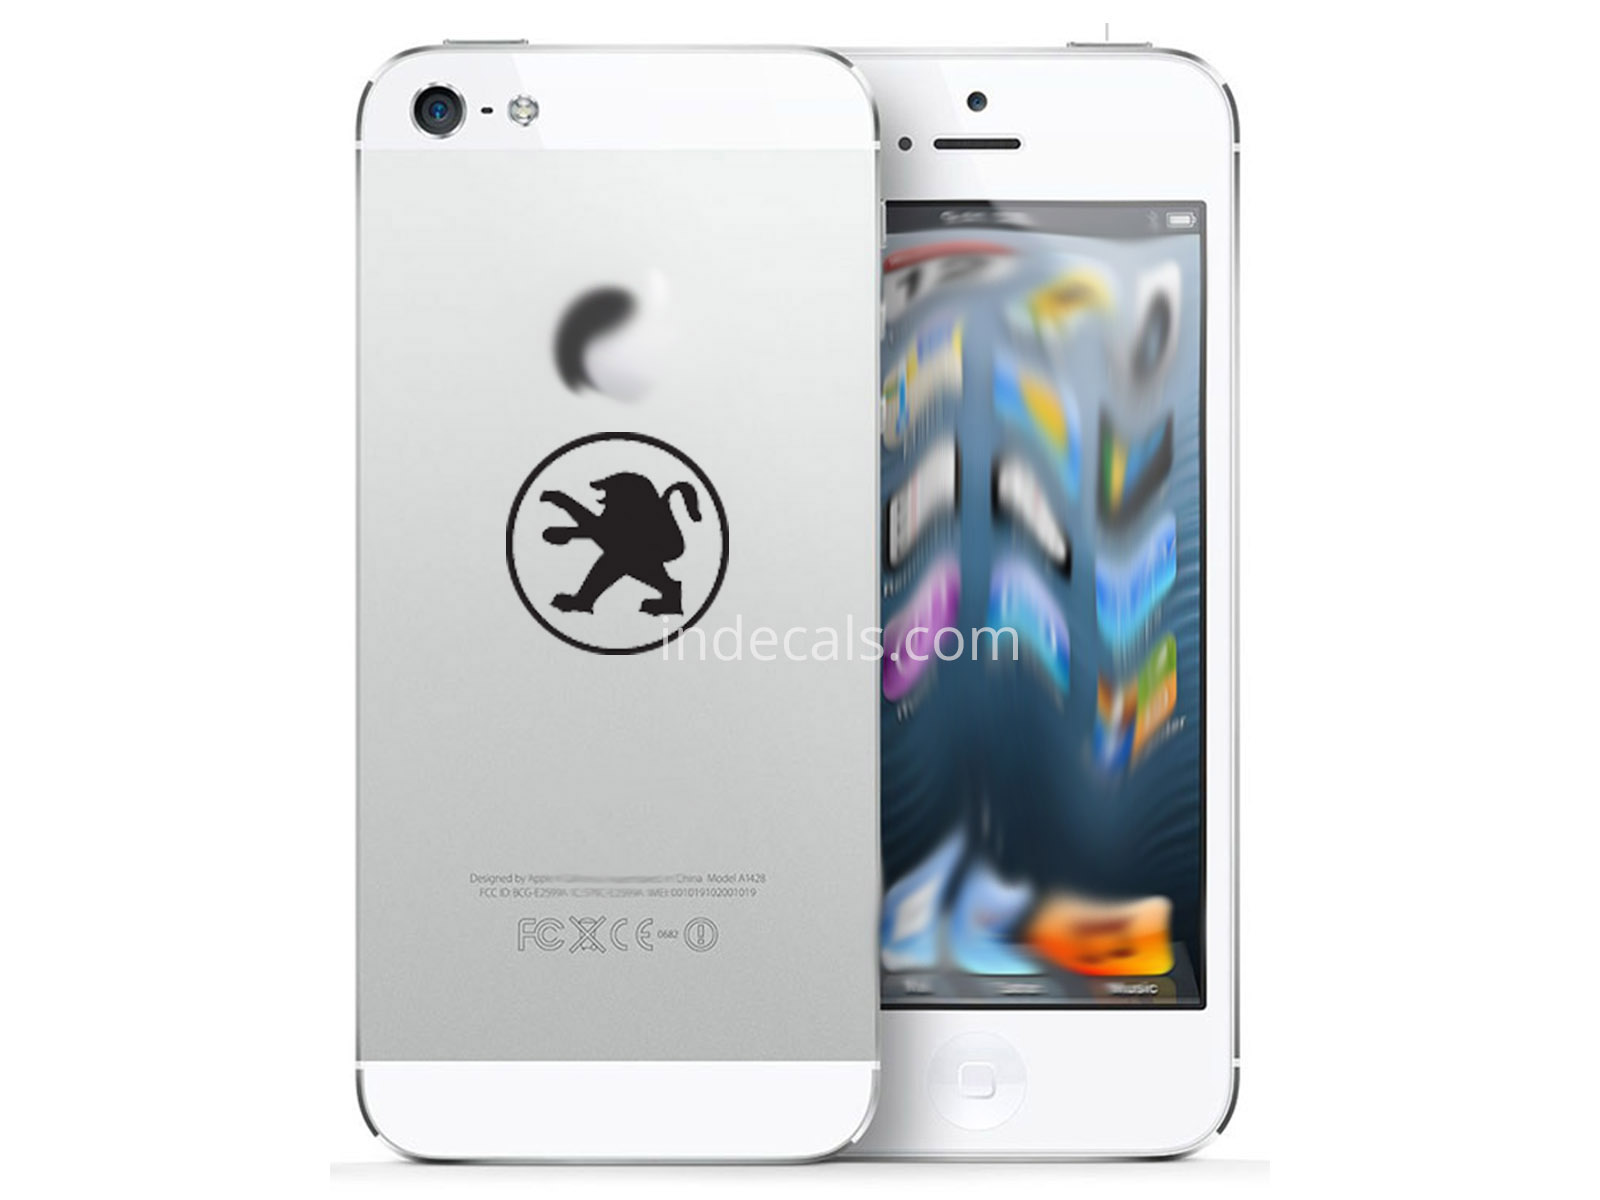 3 x Peugeot Stickers for Smartphone - Black